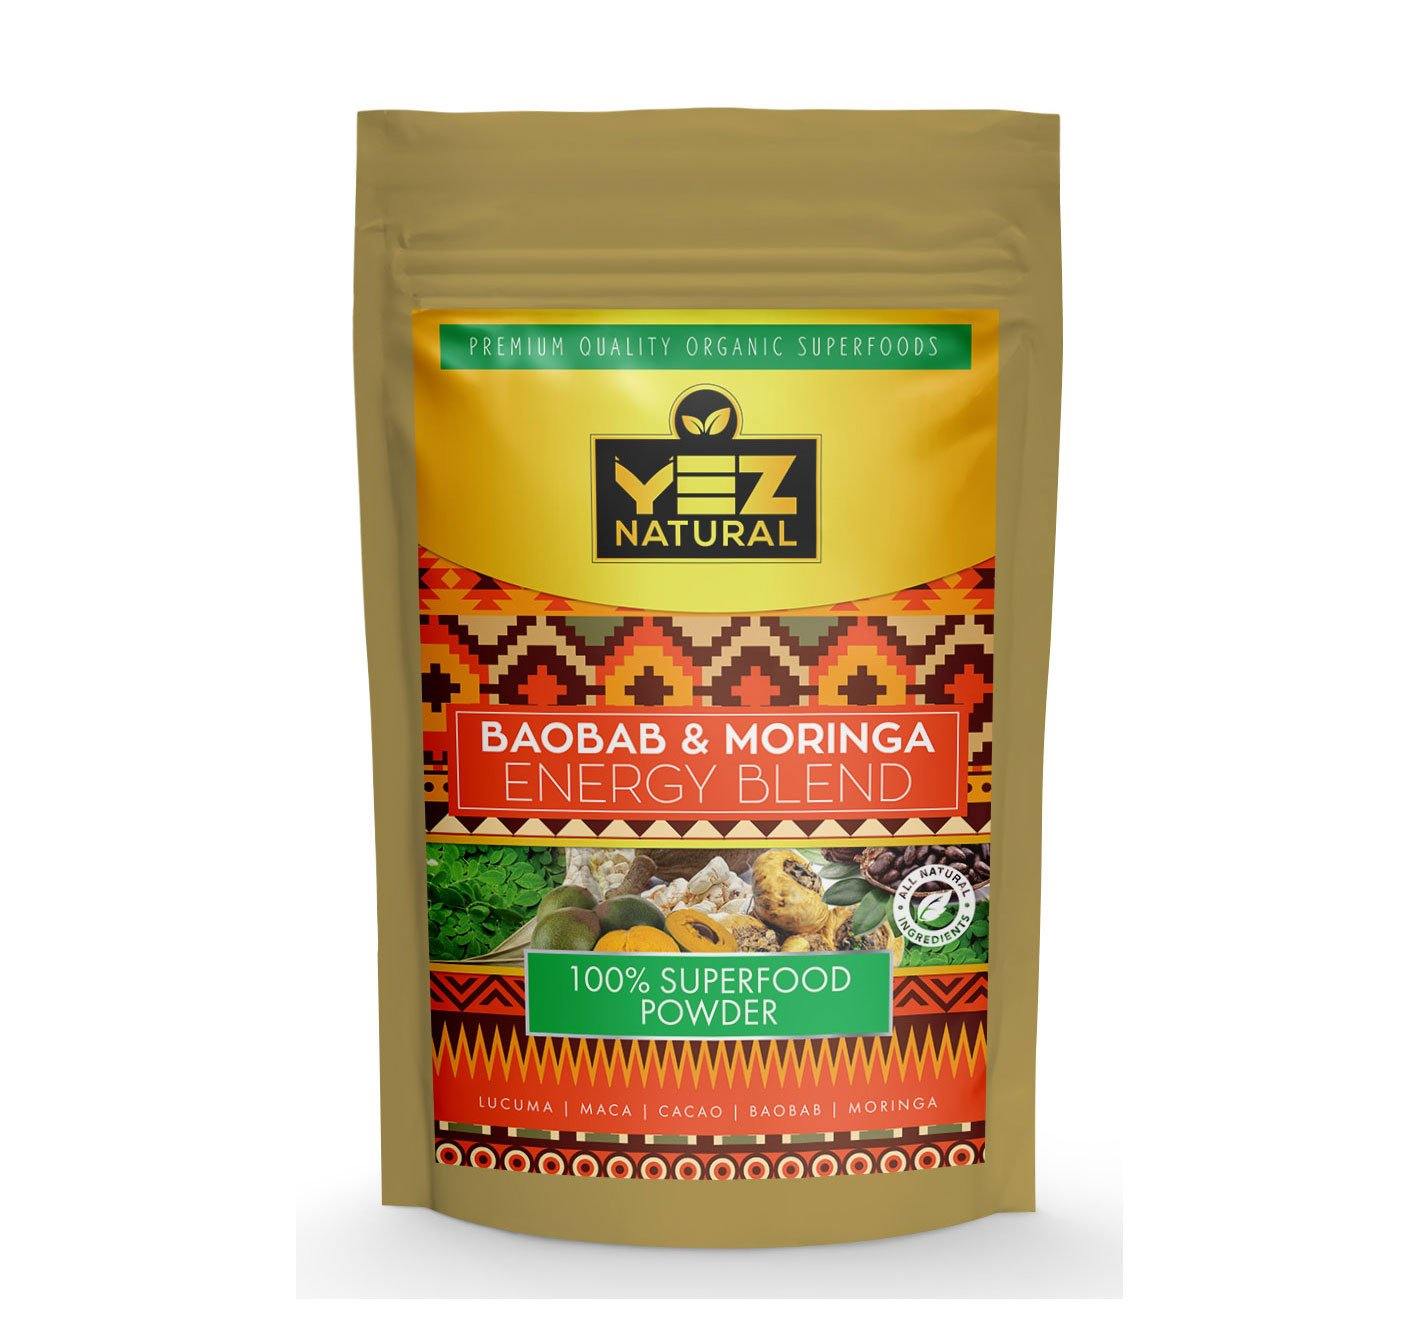 Plant-Based Superfoods Powder Mix to Boost Energy, Naturally without caffeine - YezNatural.com